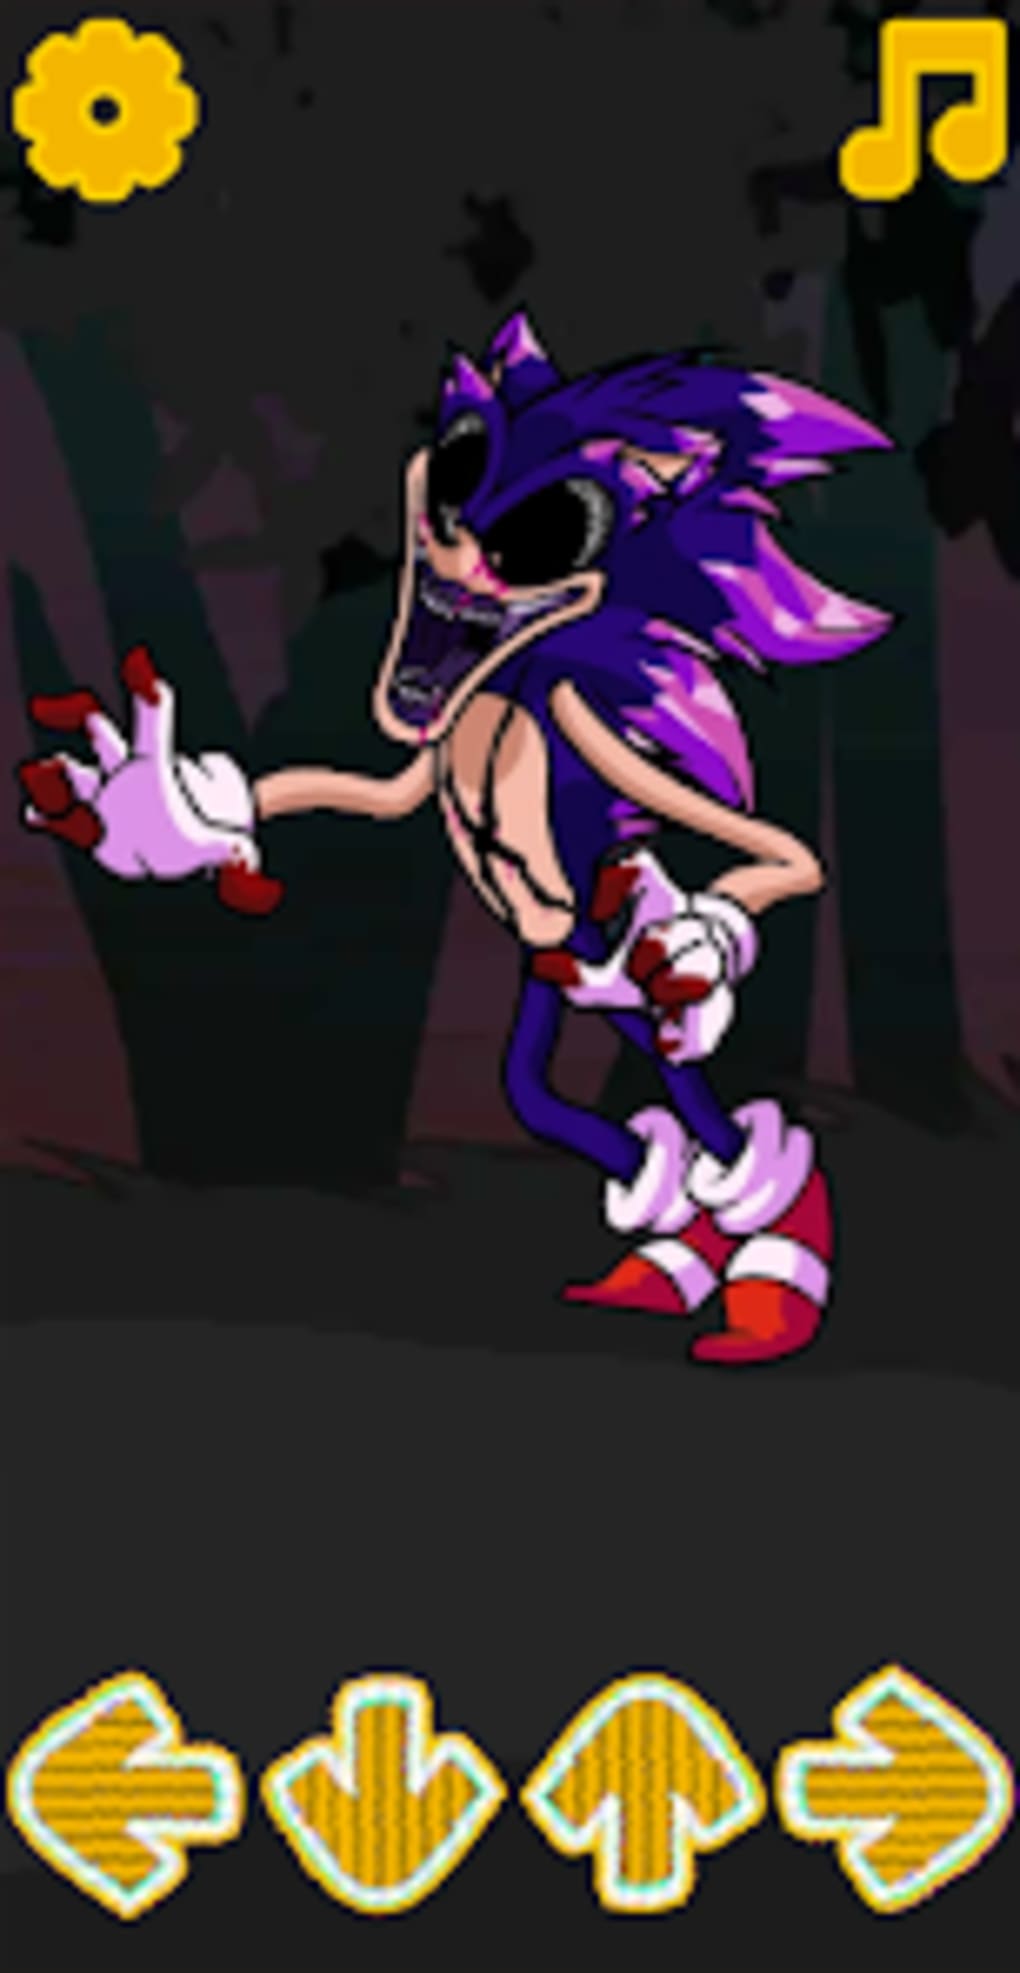 FNF Sanic Exe 2.0 Scary for Android - Download